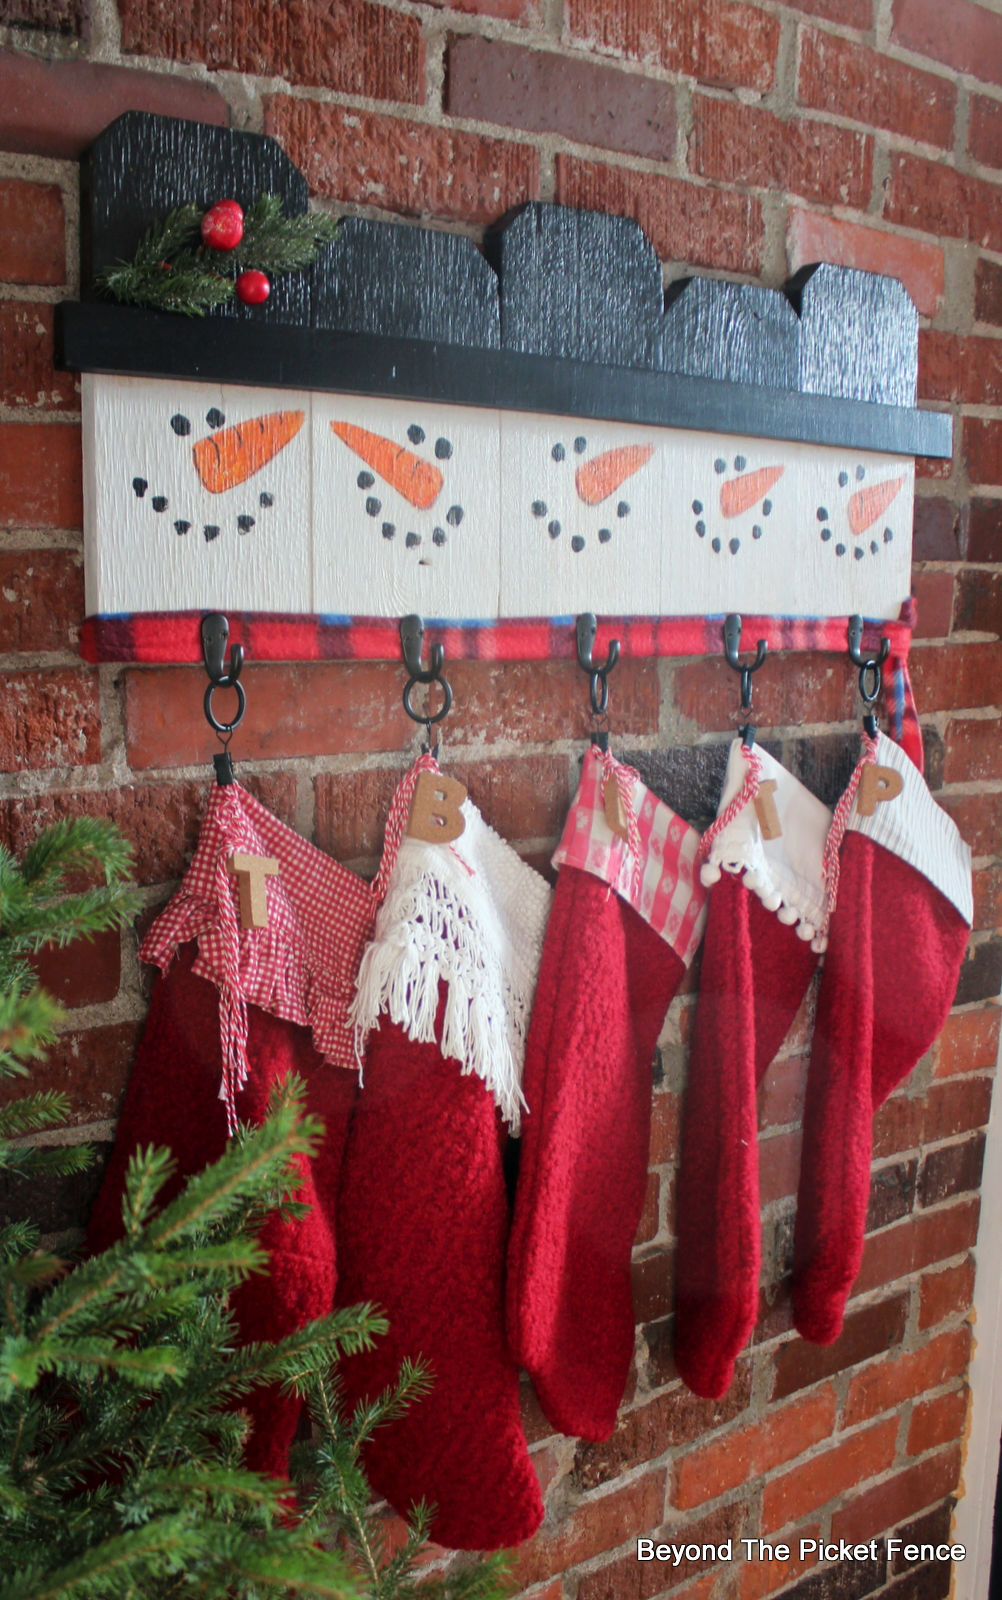 Beyond The Picket Fence: 12 Days of Christmas Day 8 Stocking Hanger